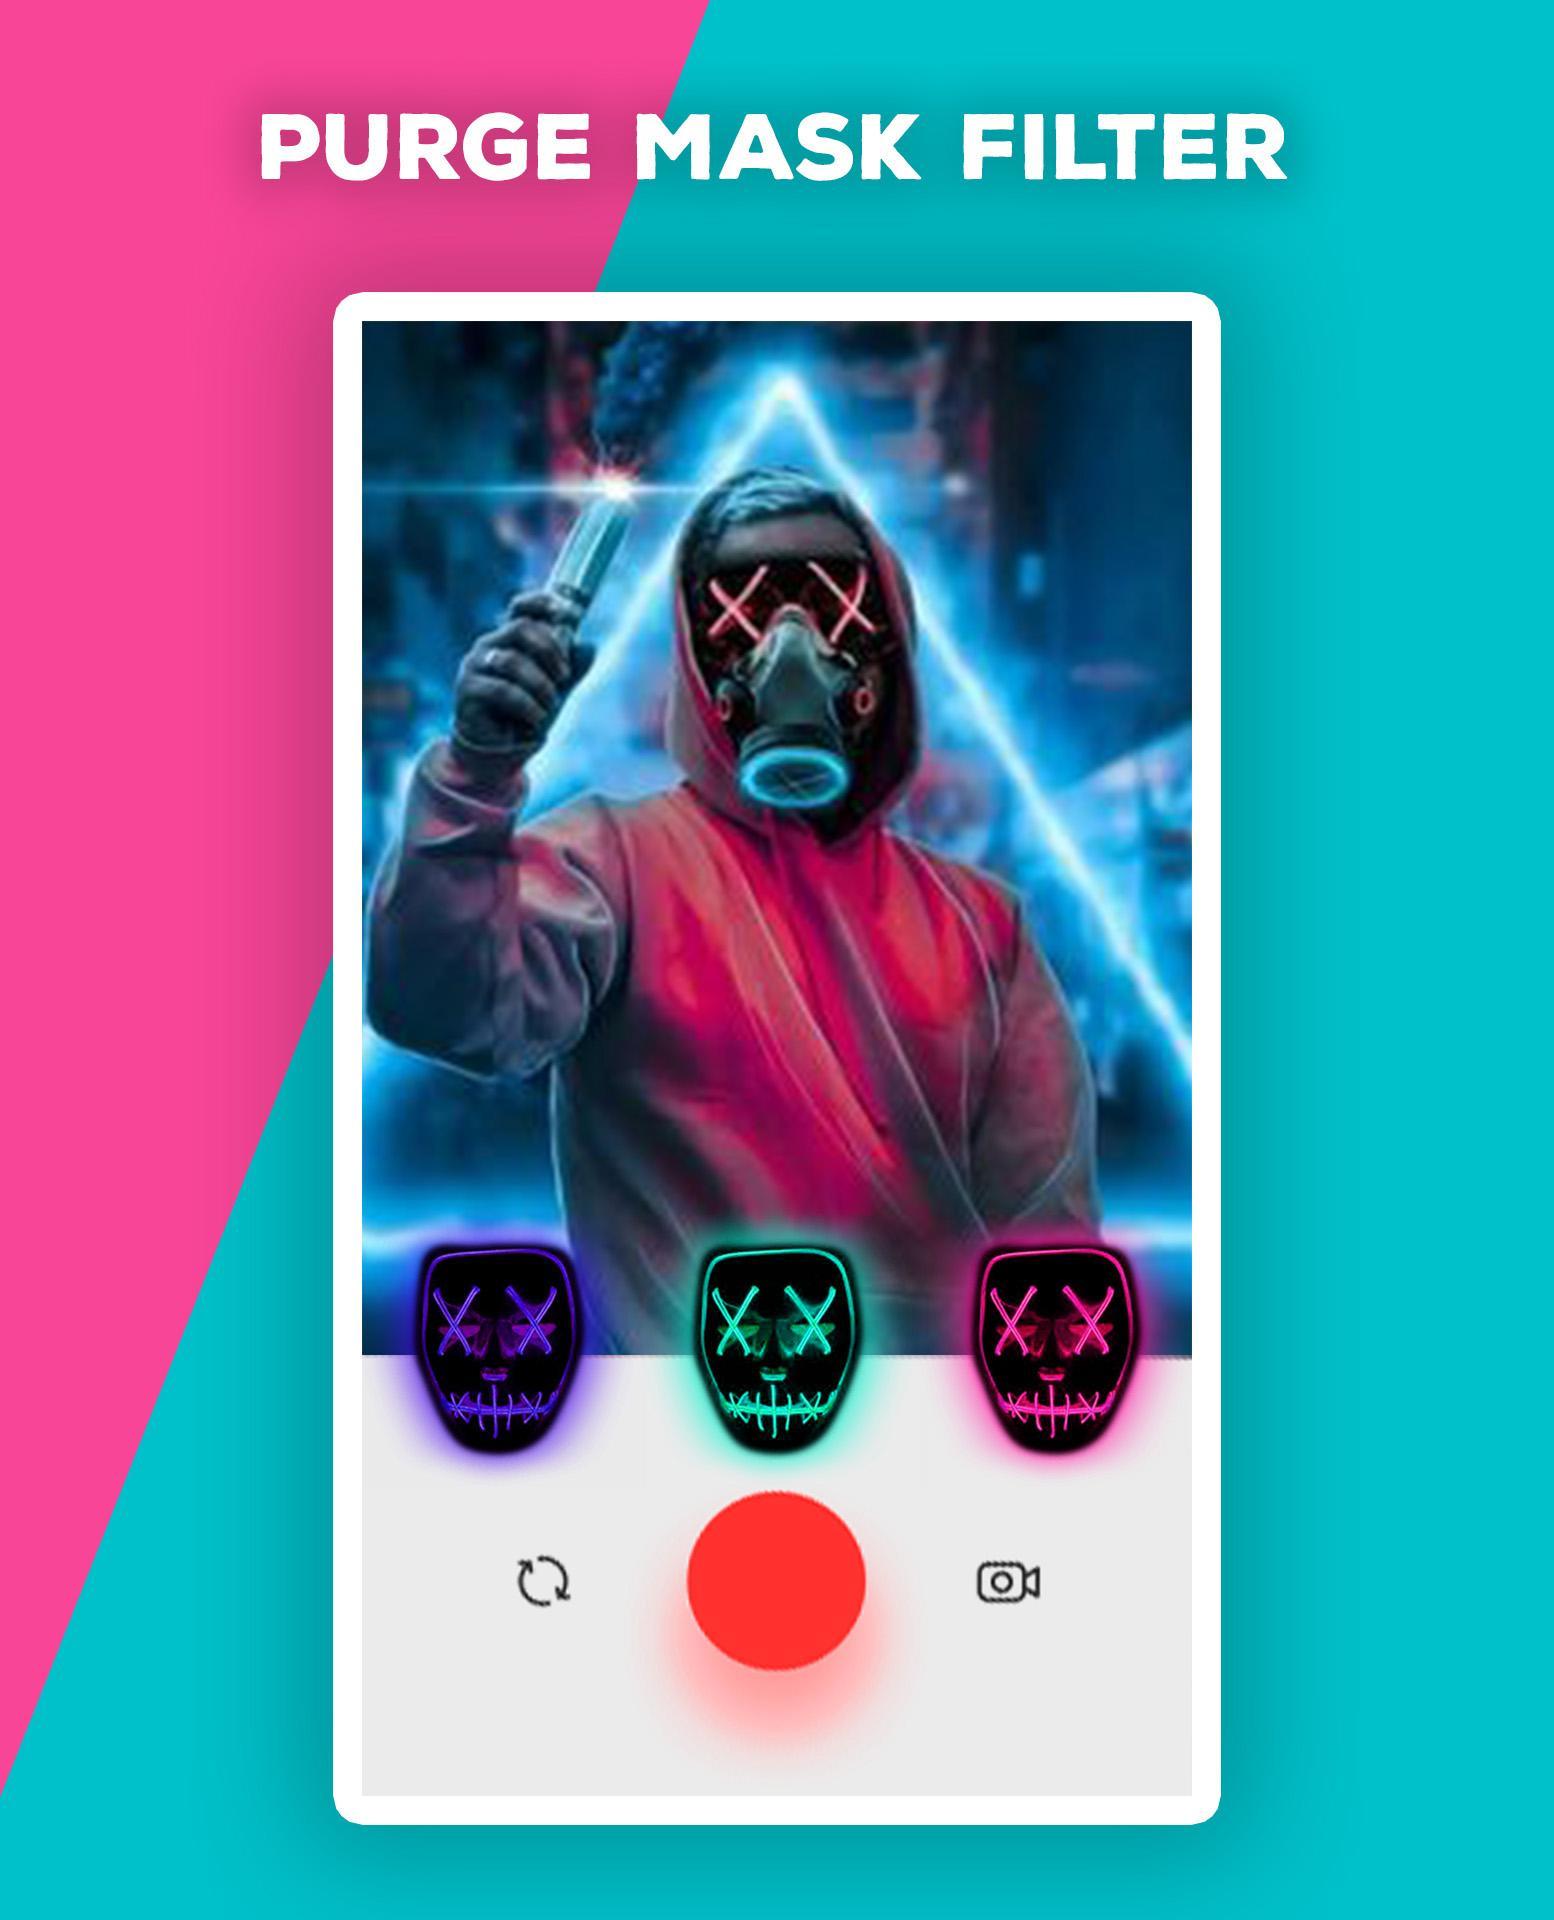 Purge Mask Filter Led Face Mask Photo Editor For Android Apk Download - purge mask roblox